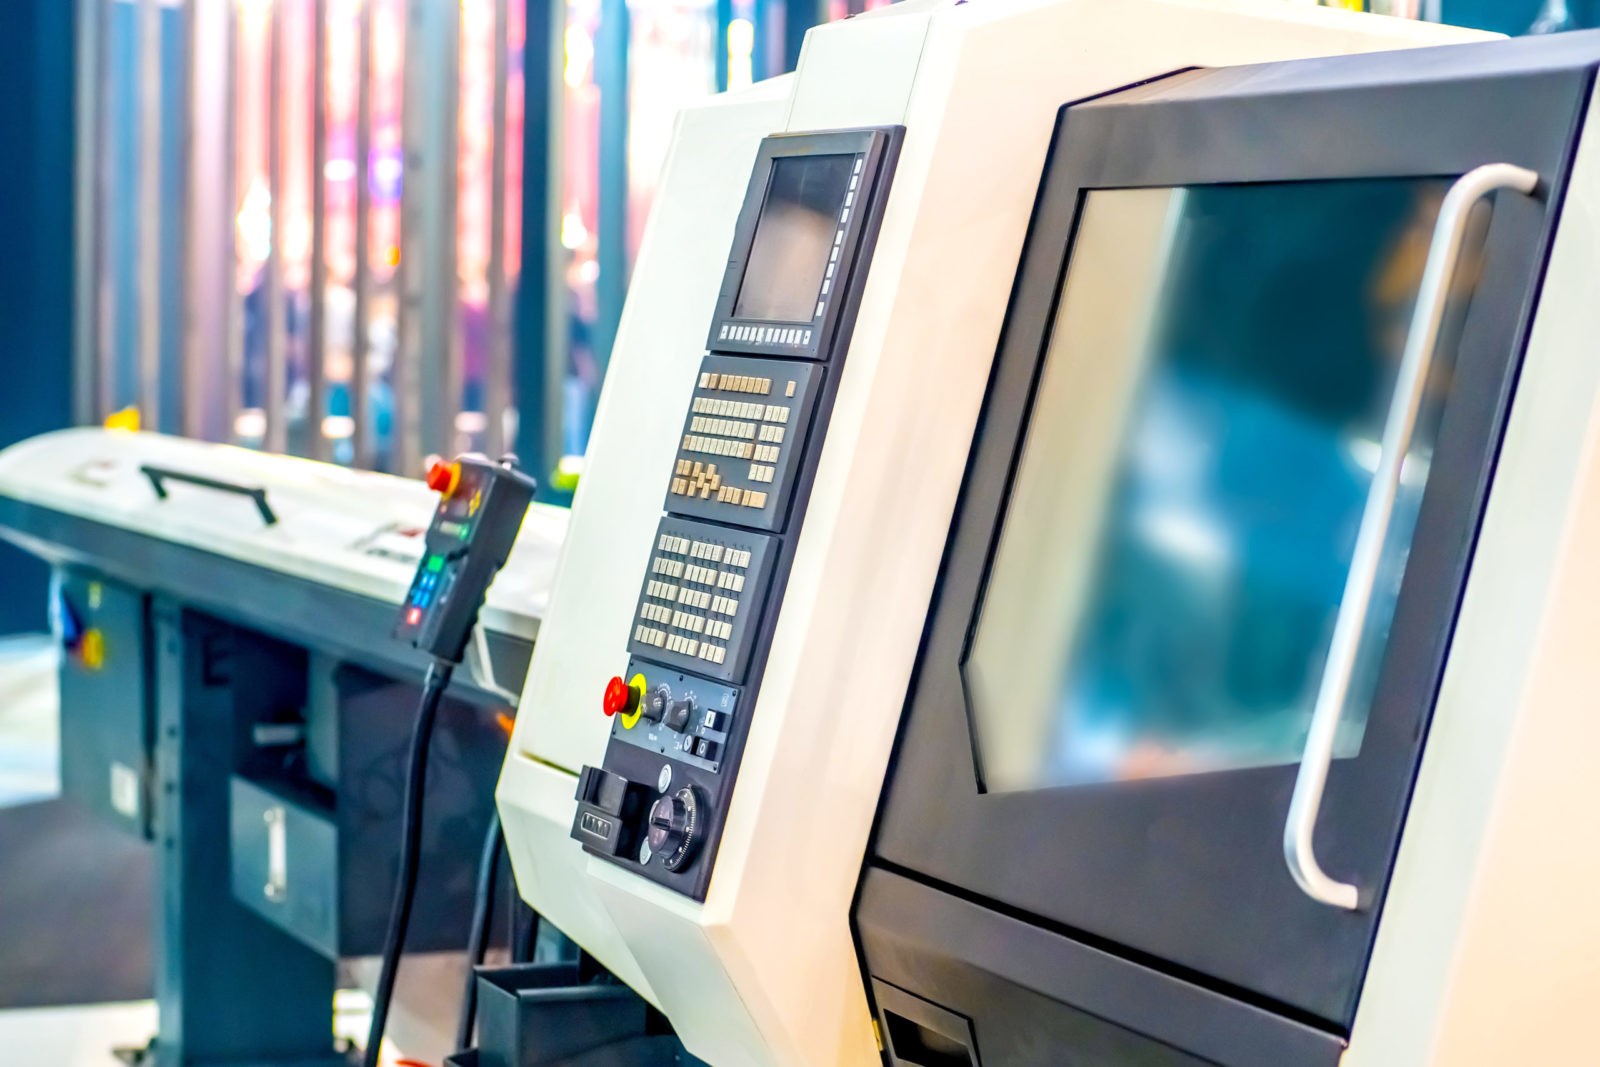 CNC machine tool repairs and breakdown service - Call us today!